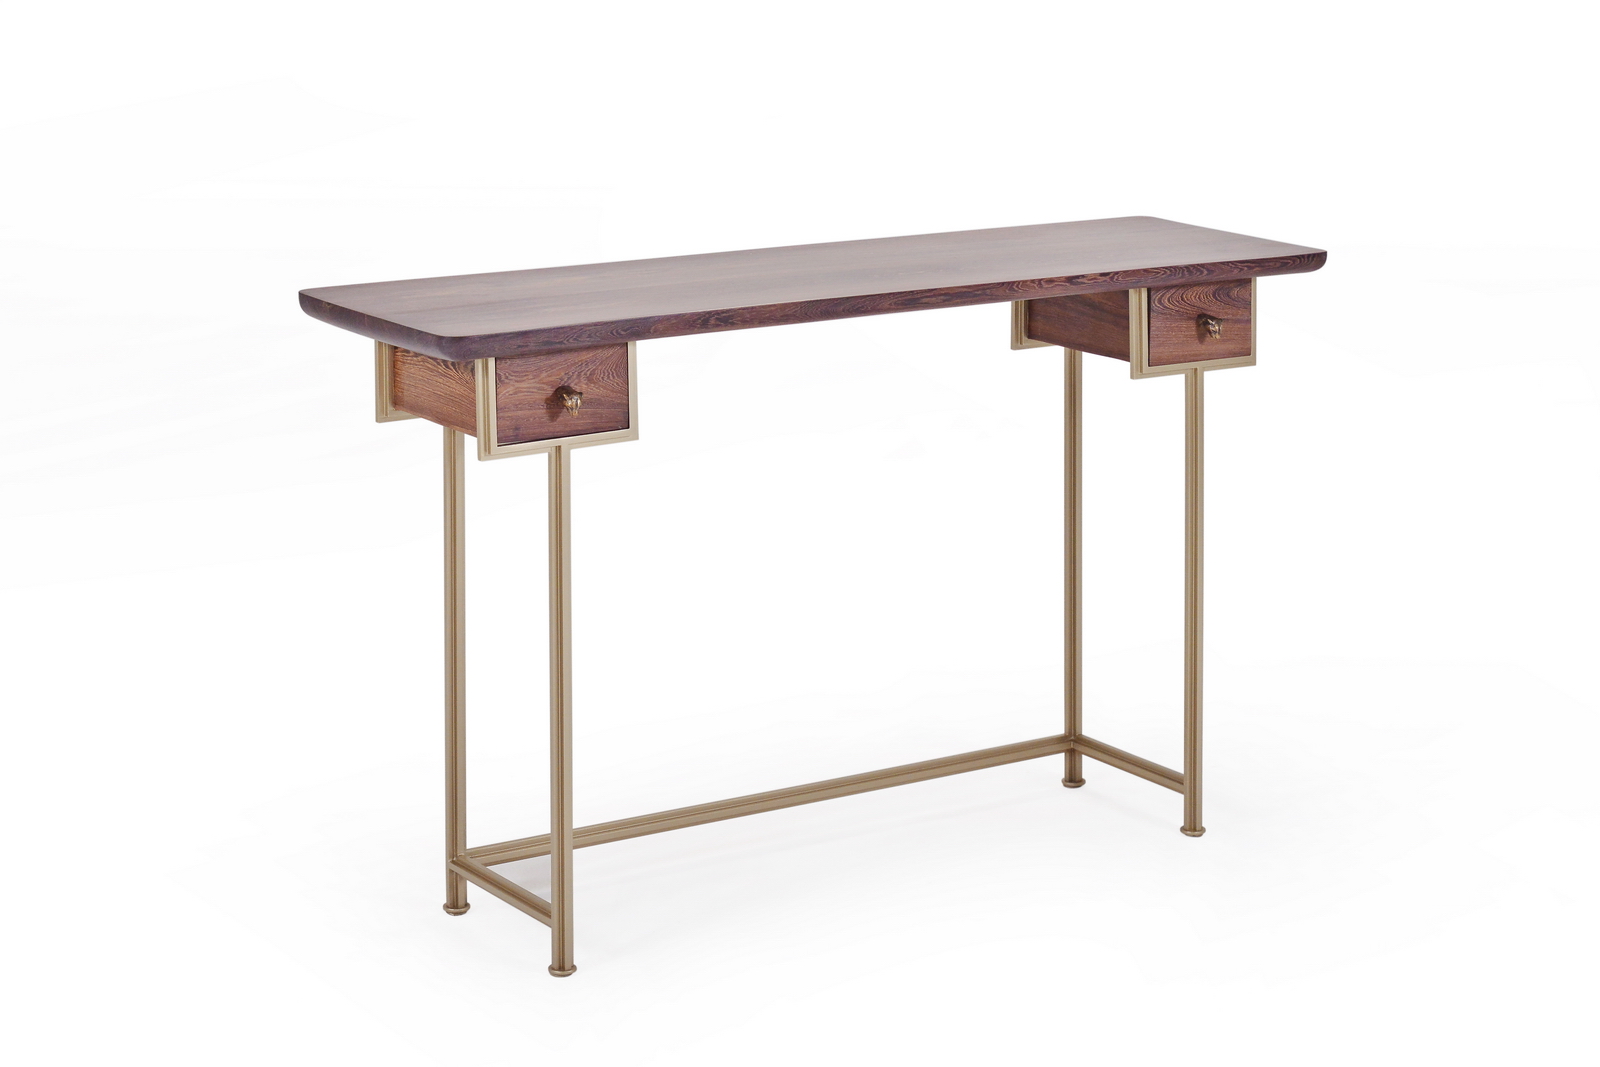 PTendercool-Customized Desk-BS1-BB-BL-NO-211007-03